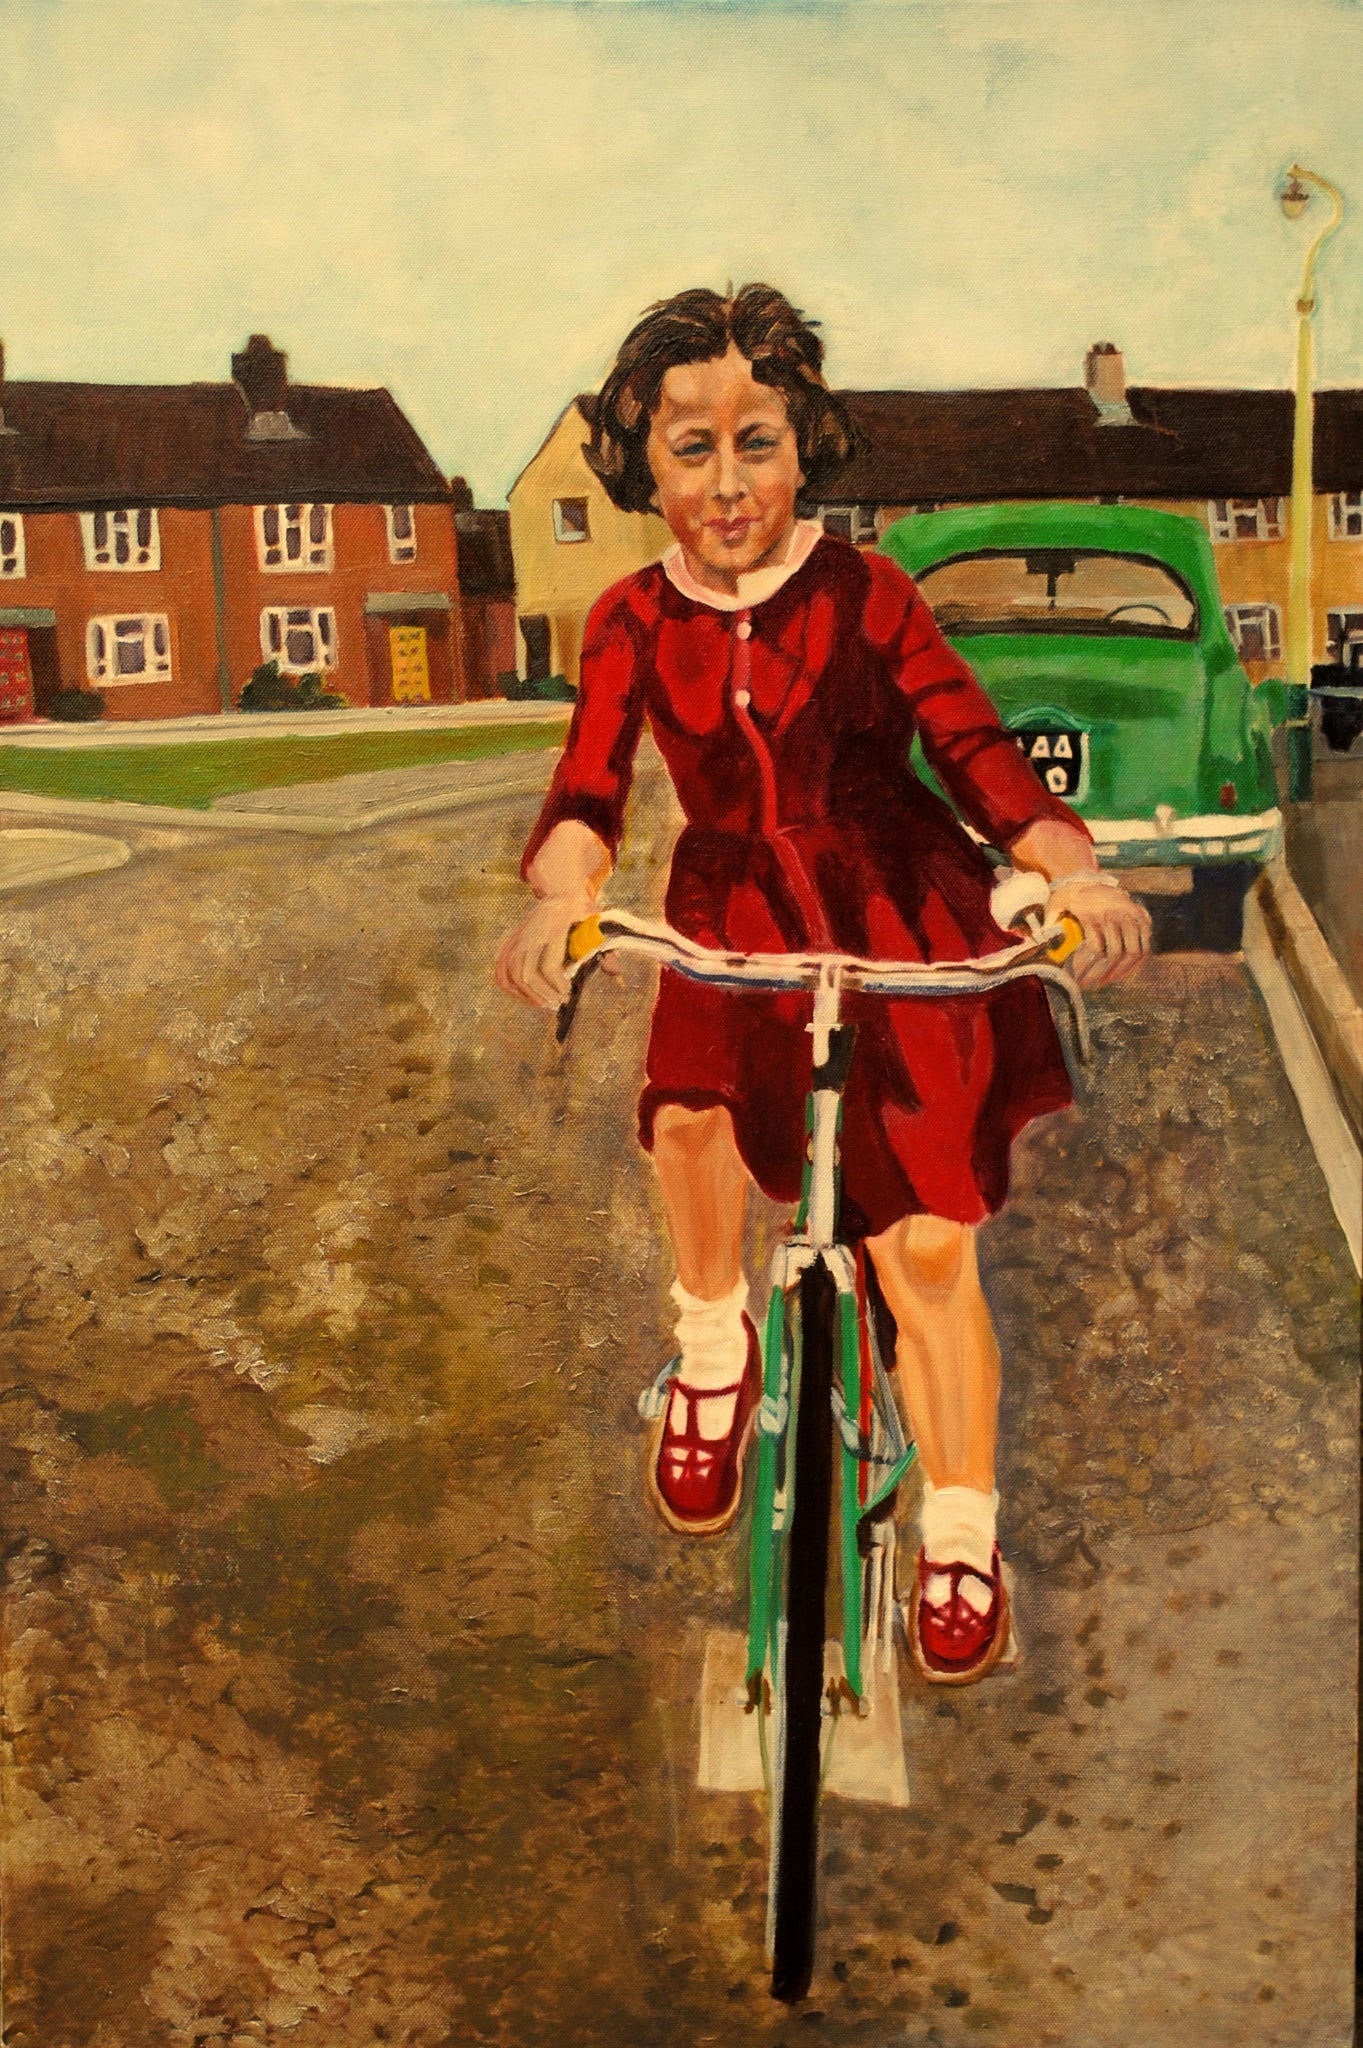 my first bike ride, a girl in red 60s dress riding a bike, painting by stella tooth